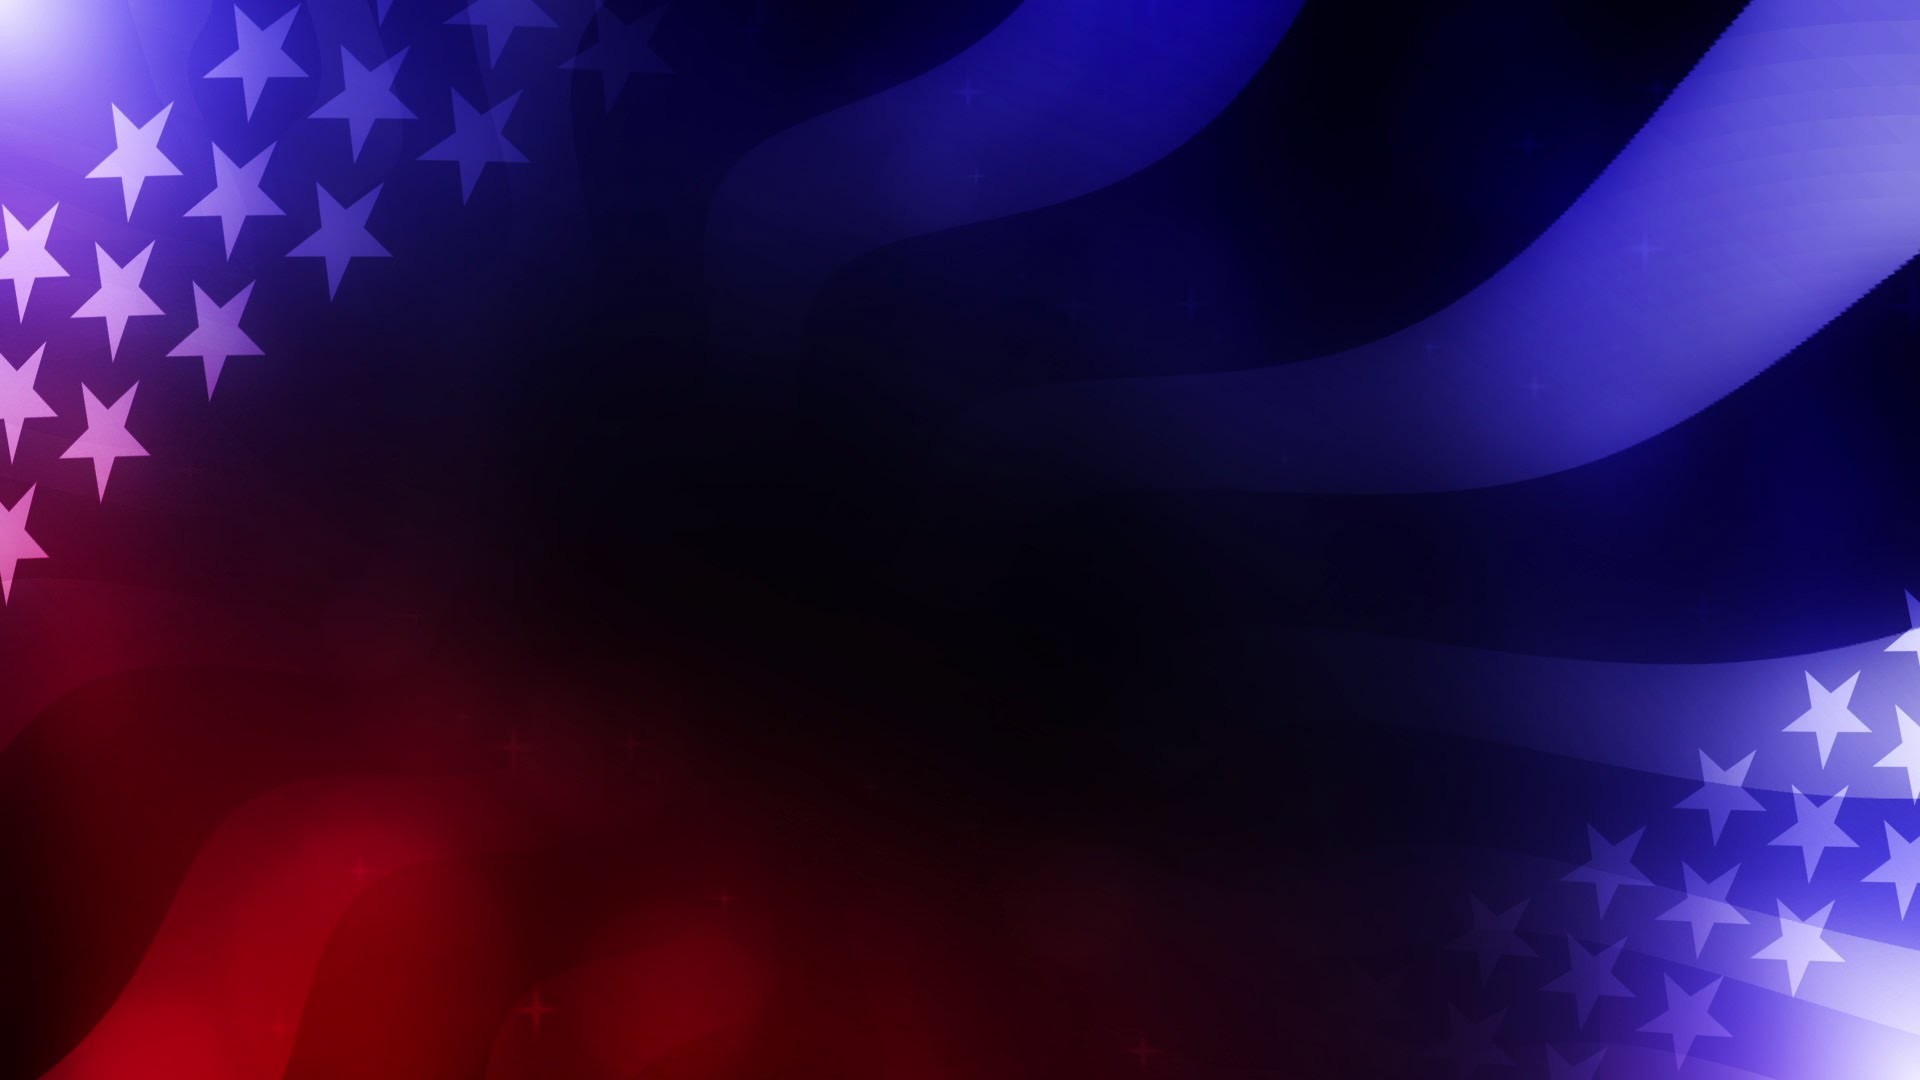 1920x1080 Christian Patriotic Background Patriotic Wele Video By Christian #4147